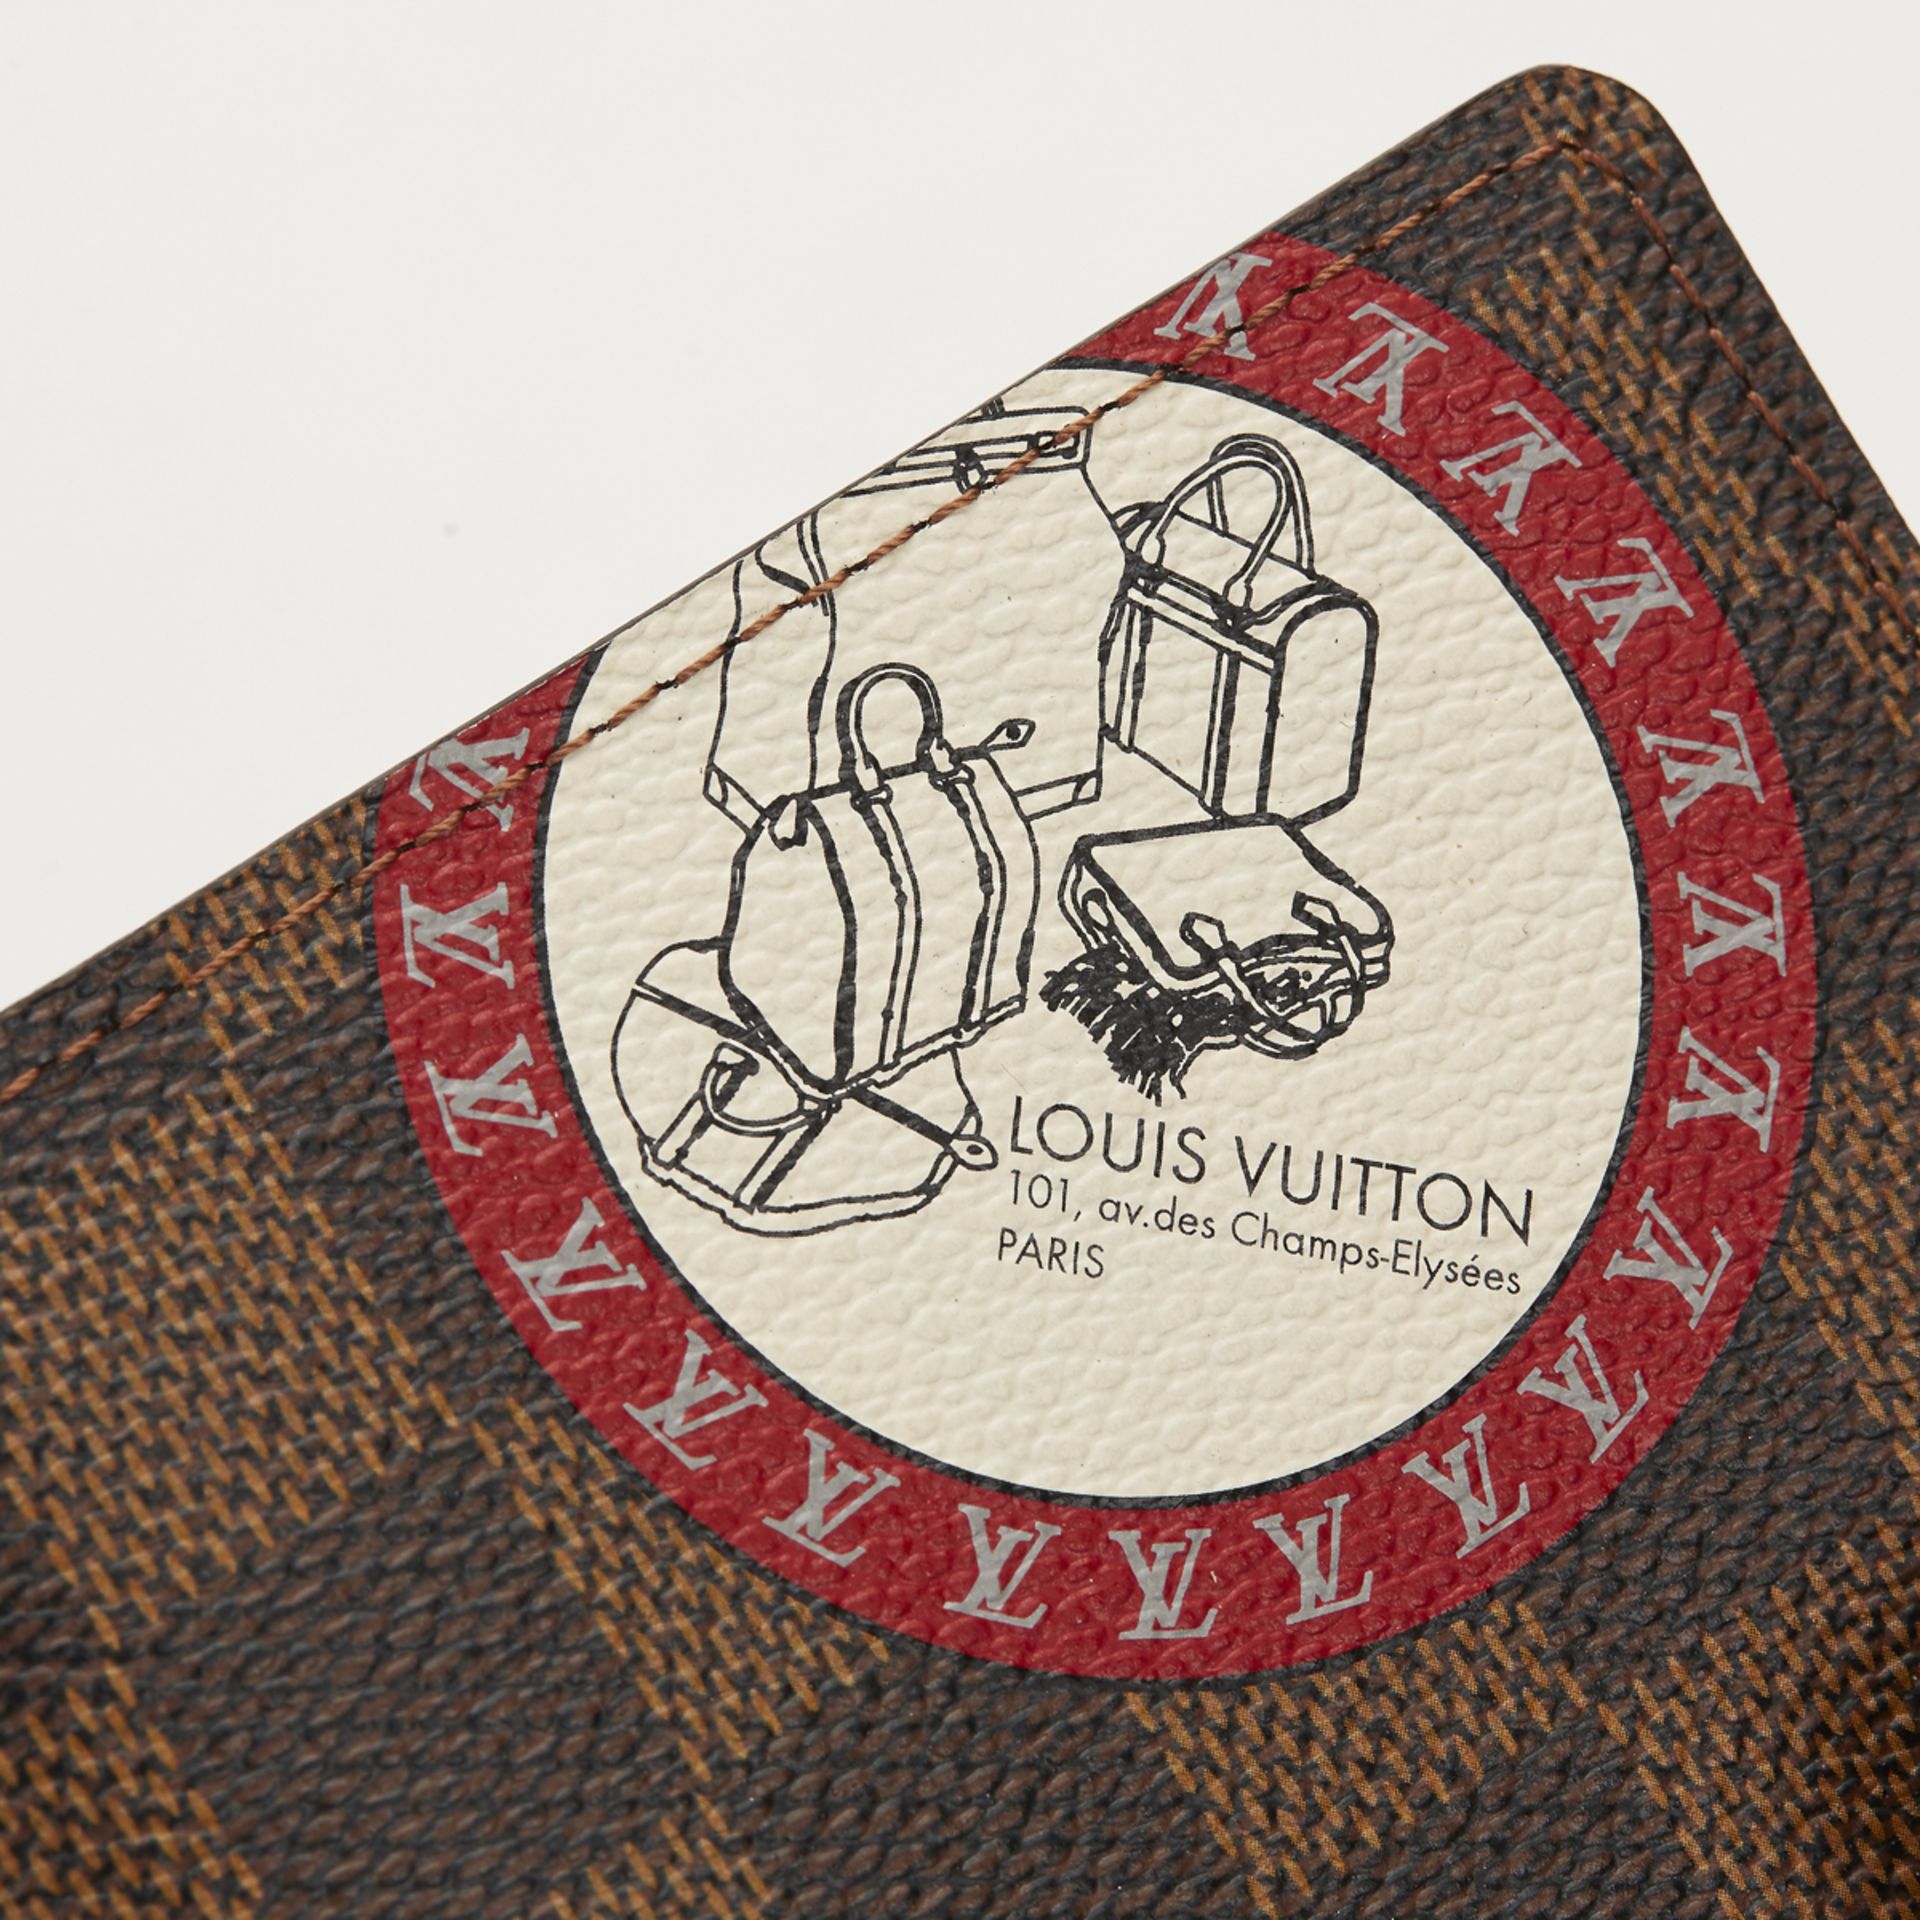 LOUIS VUITTON, Small Ring Agenda - Image 7 of 11